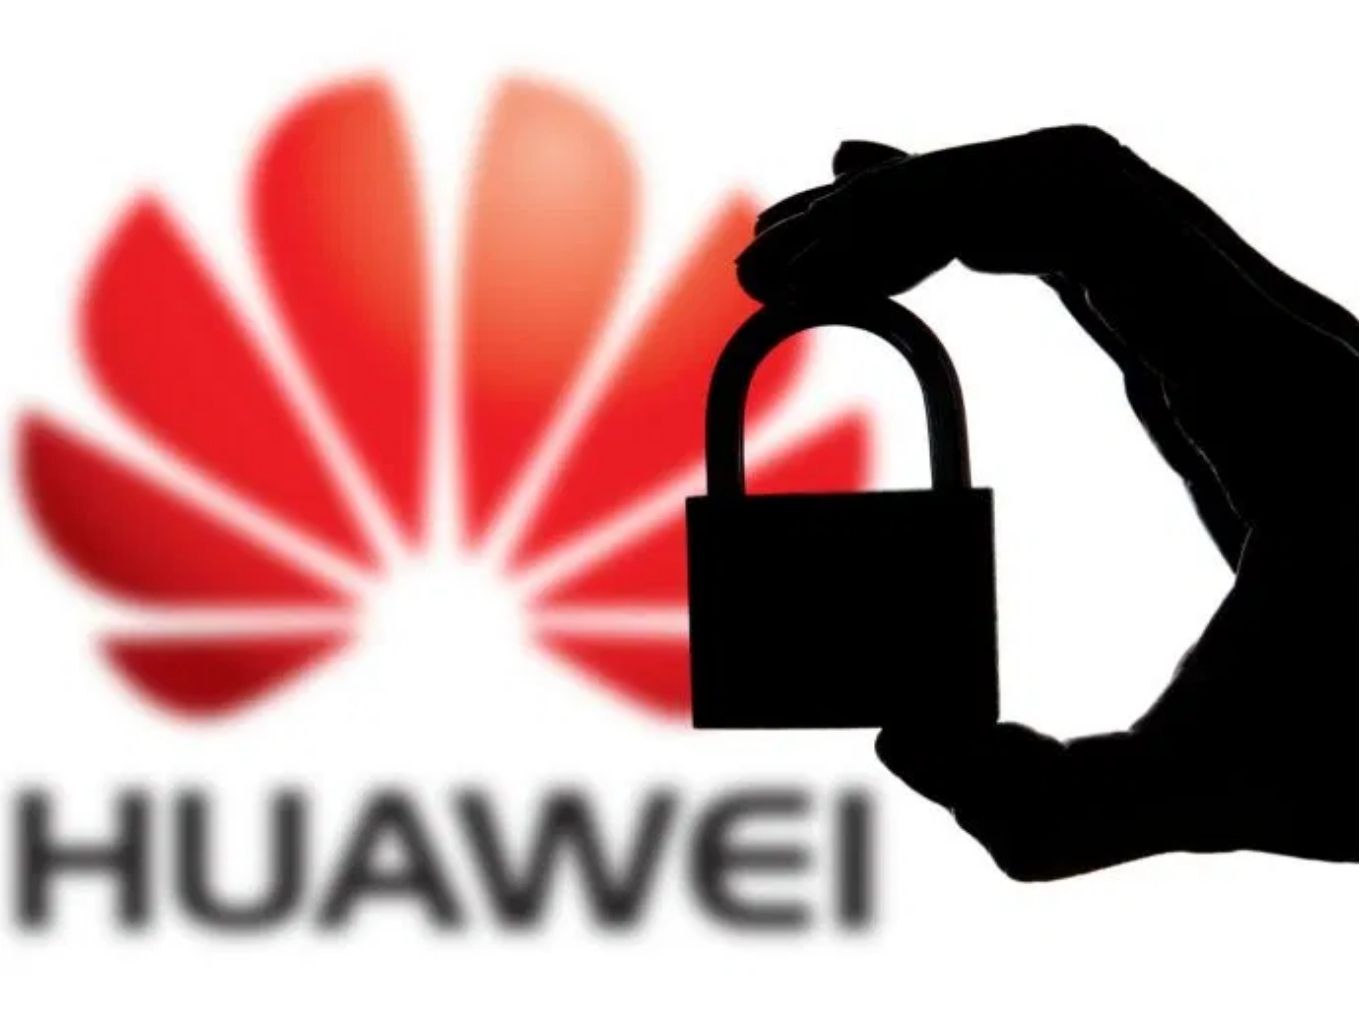 5G Trials: Indian Govt To Analyse Security Risks From Huawei & Co